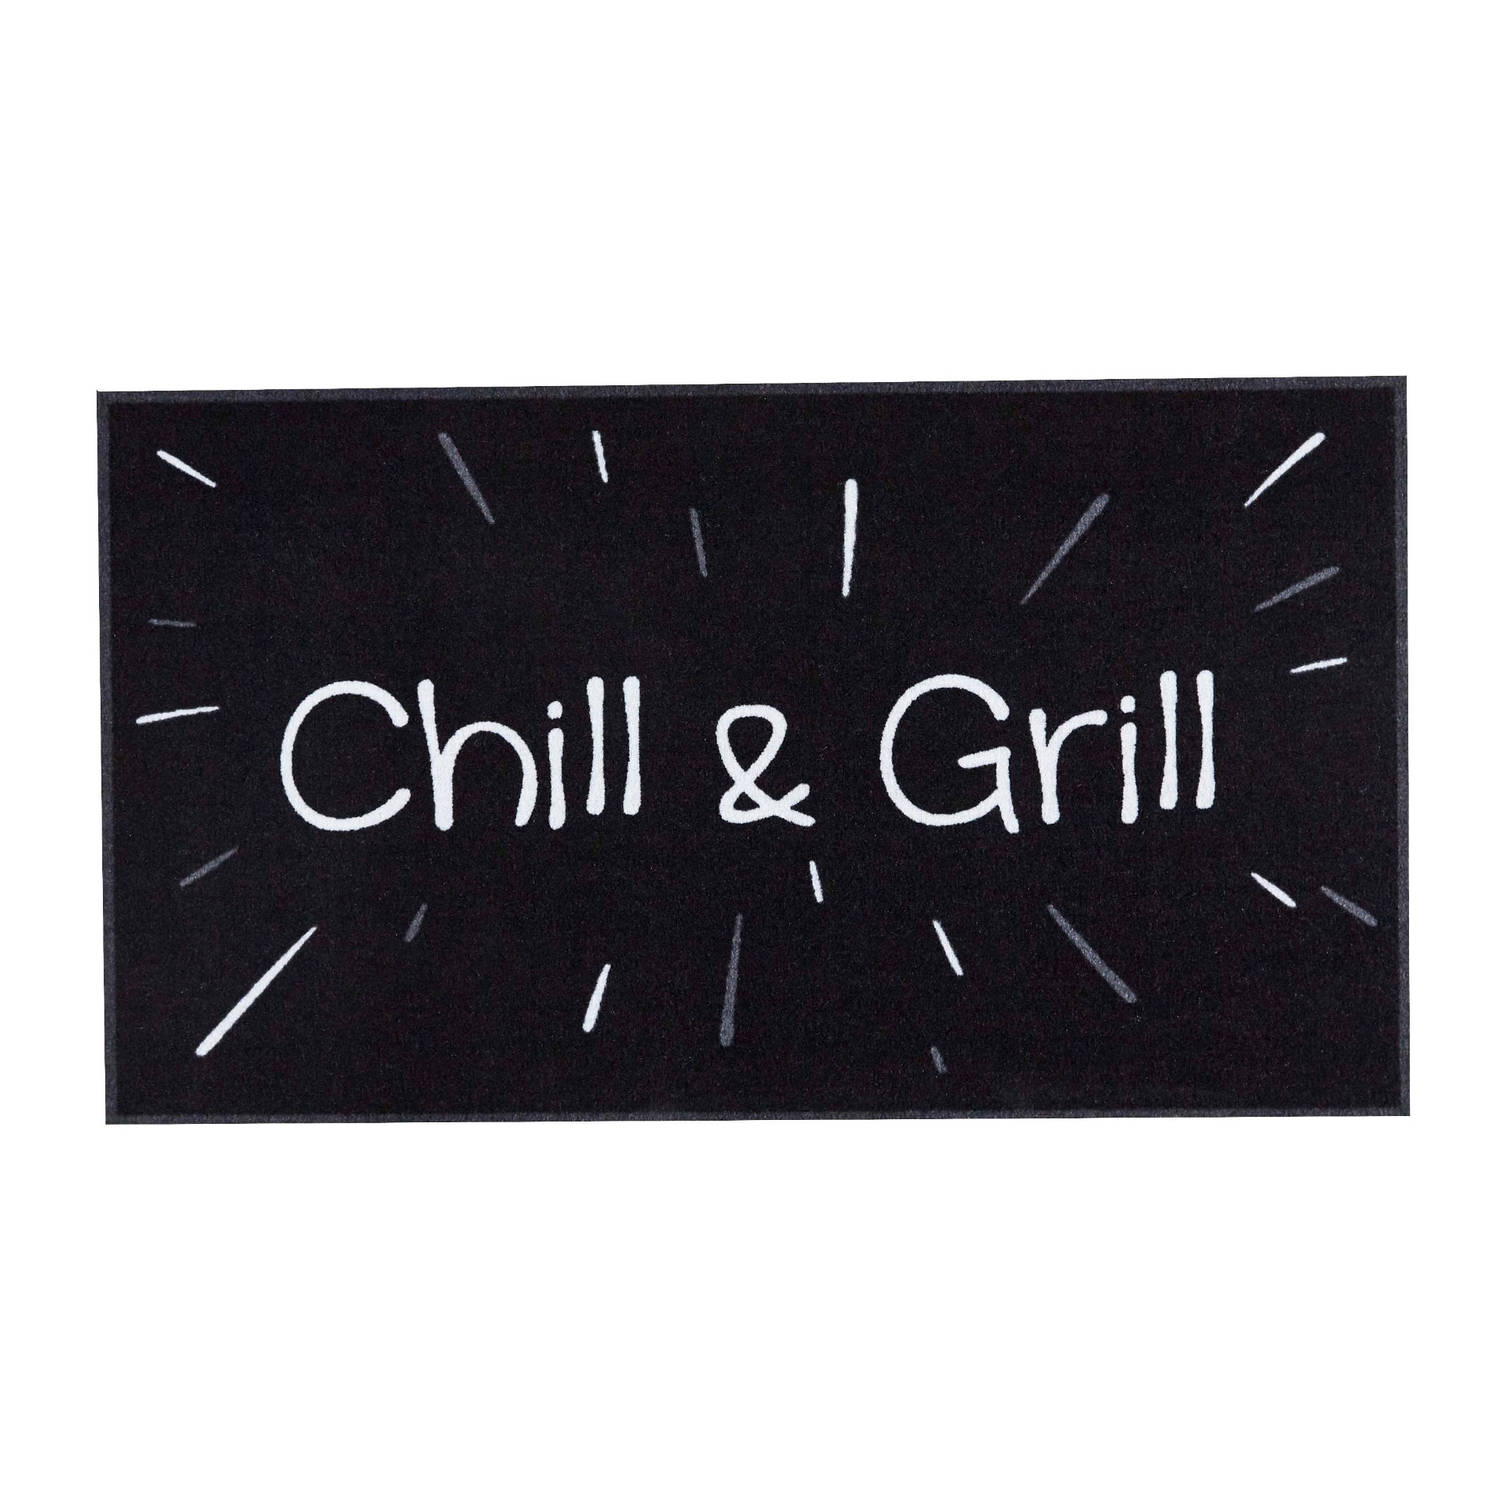 MD Entree - Barbecue Mat - Chill & Grill - Zwart - 67 x 120 cm